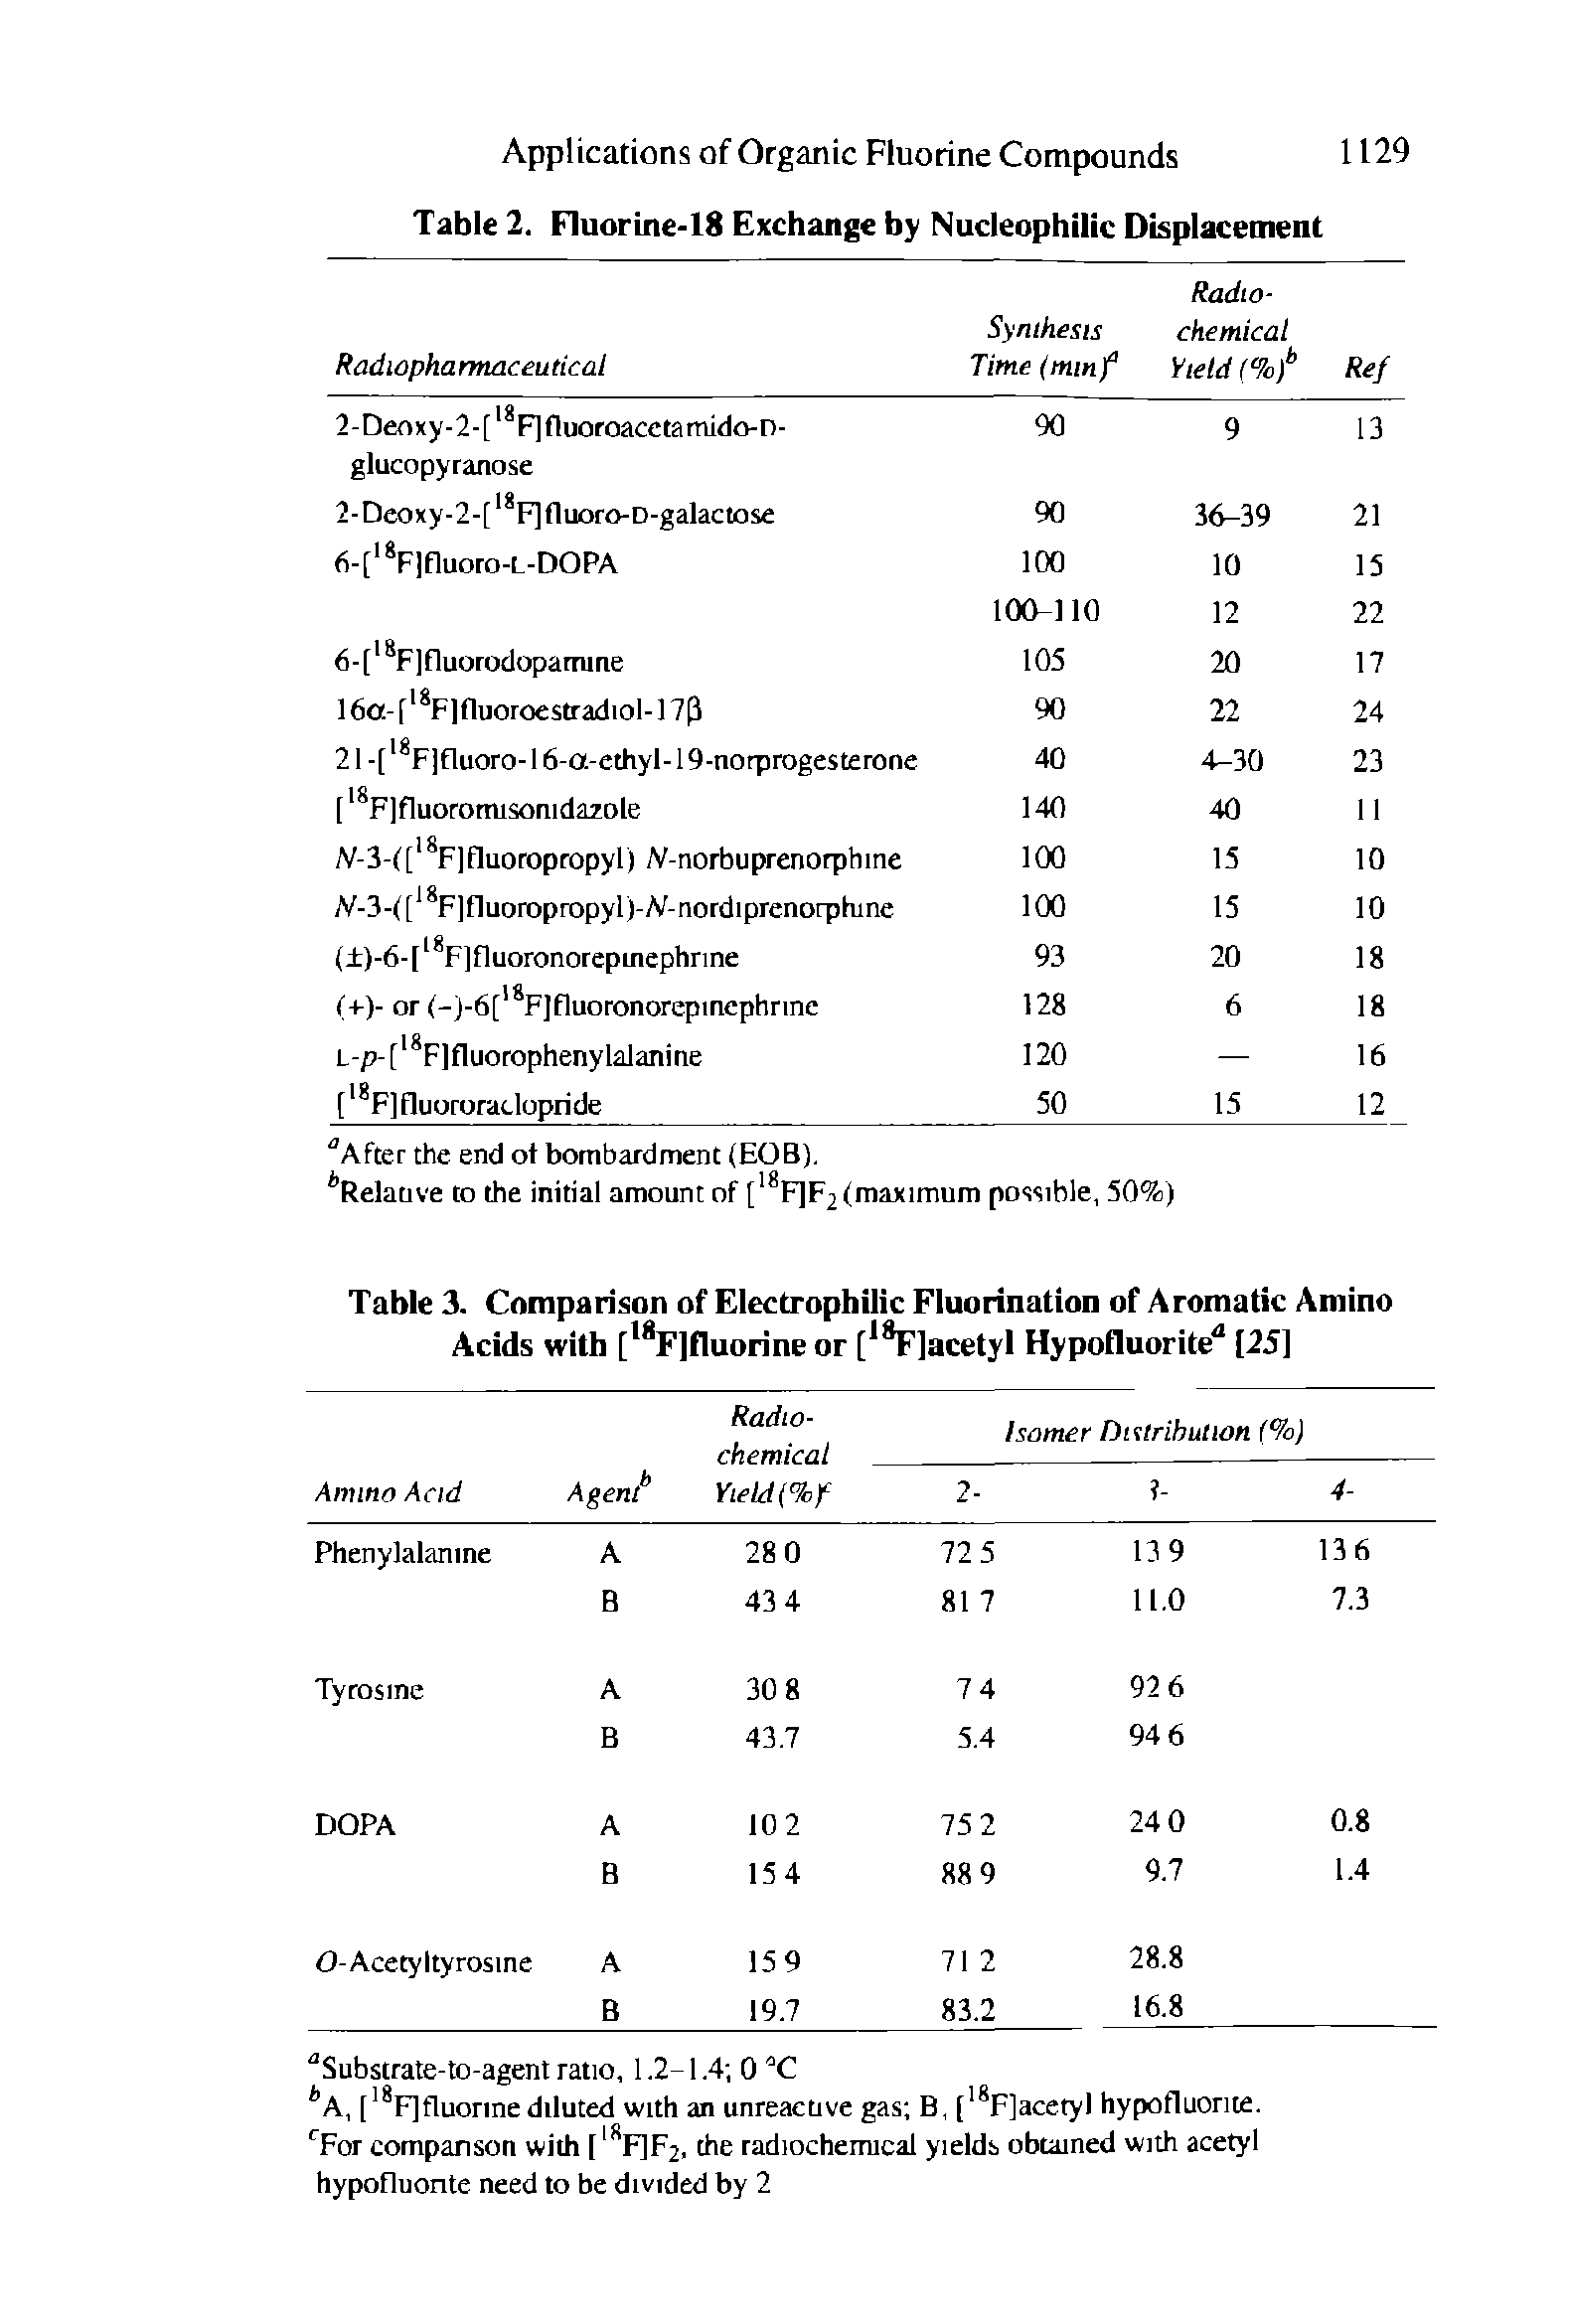 Table 3. Comparison of Electrophilic Fluorination of Aromatic Amino Acids with [ F]fluorine or [ F]acetyl Hypofluorite" [25]...